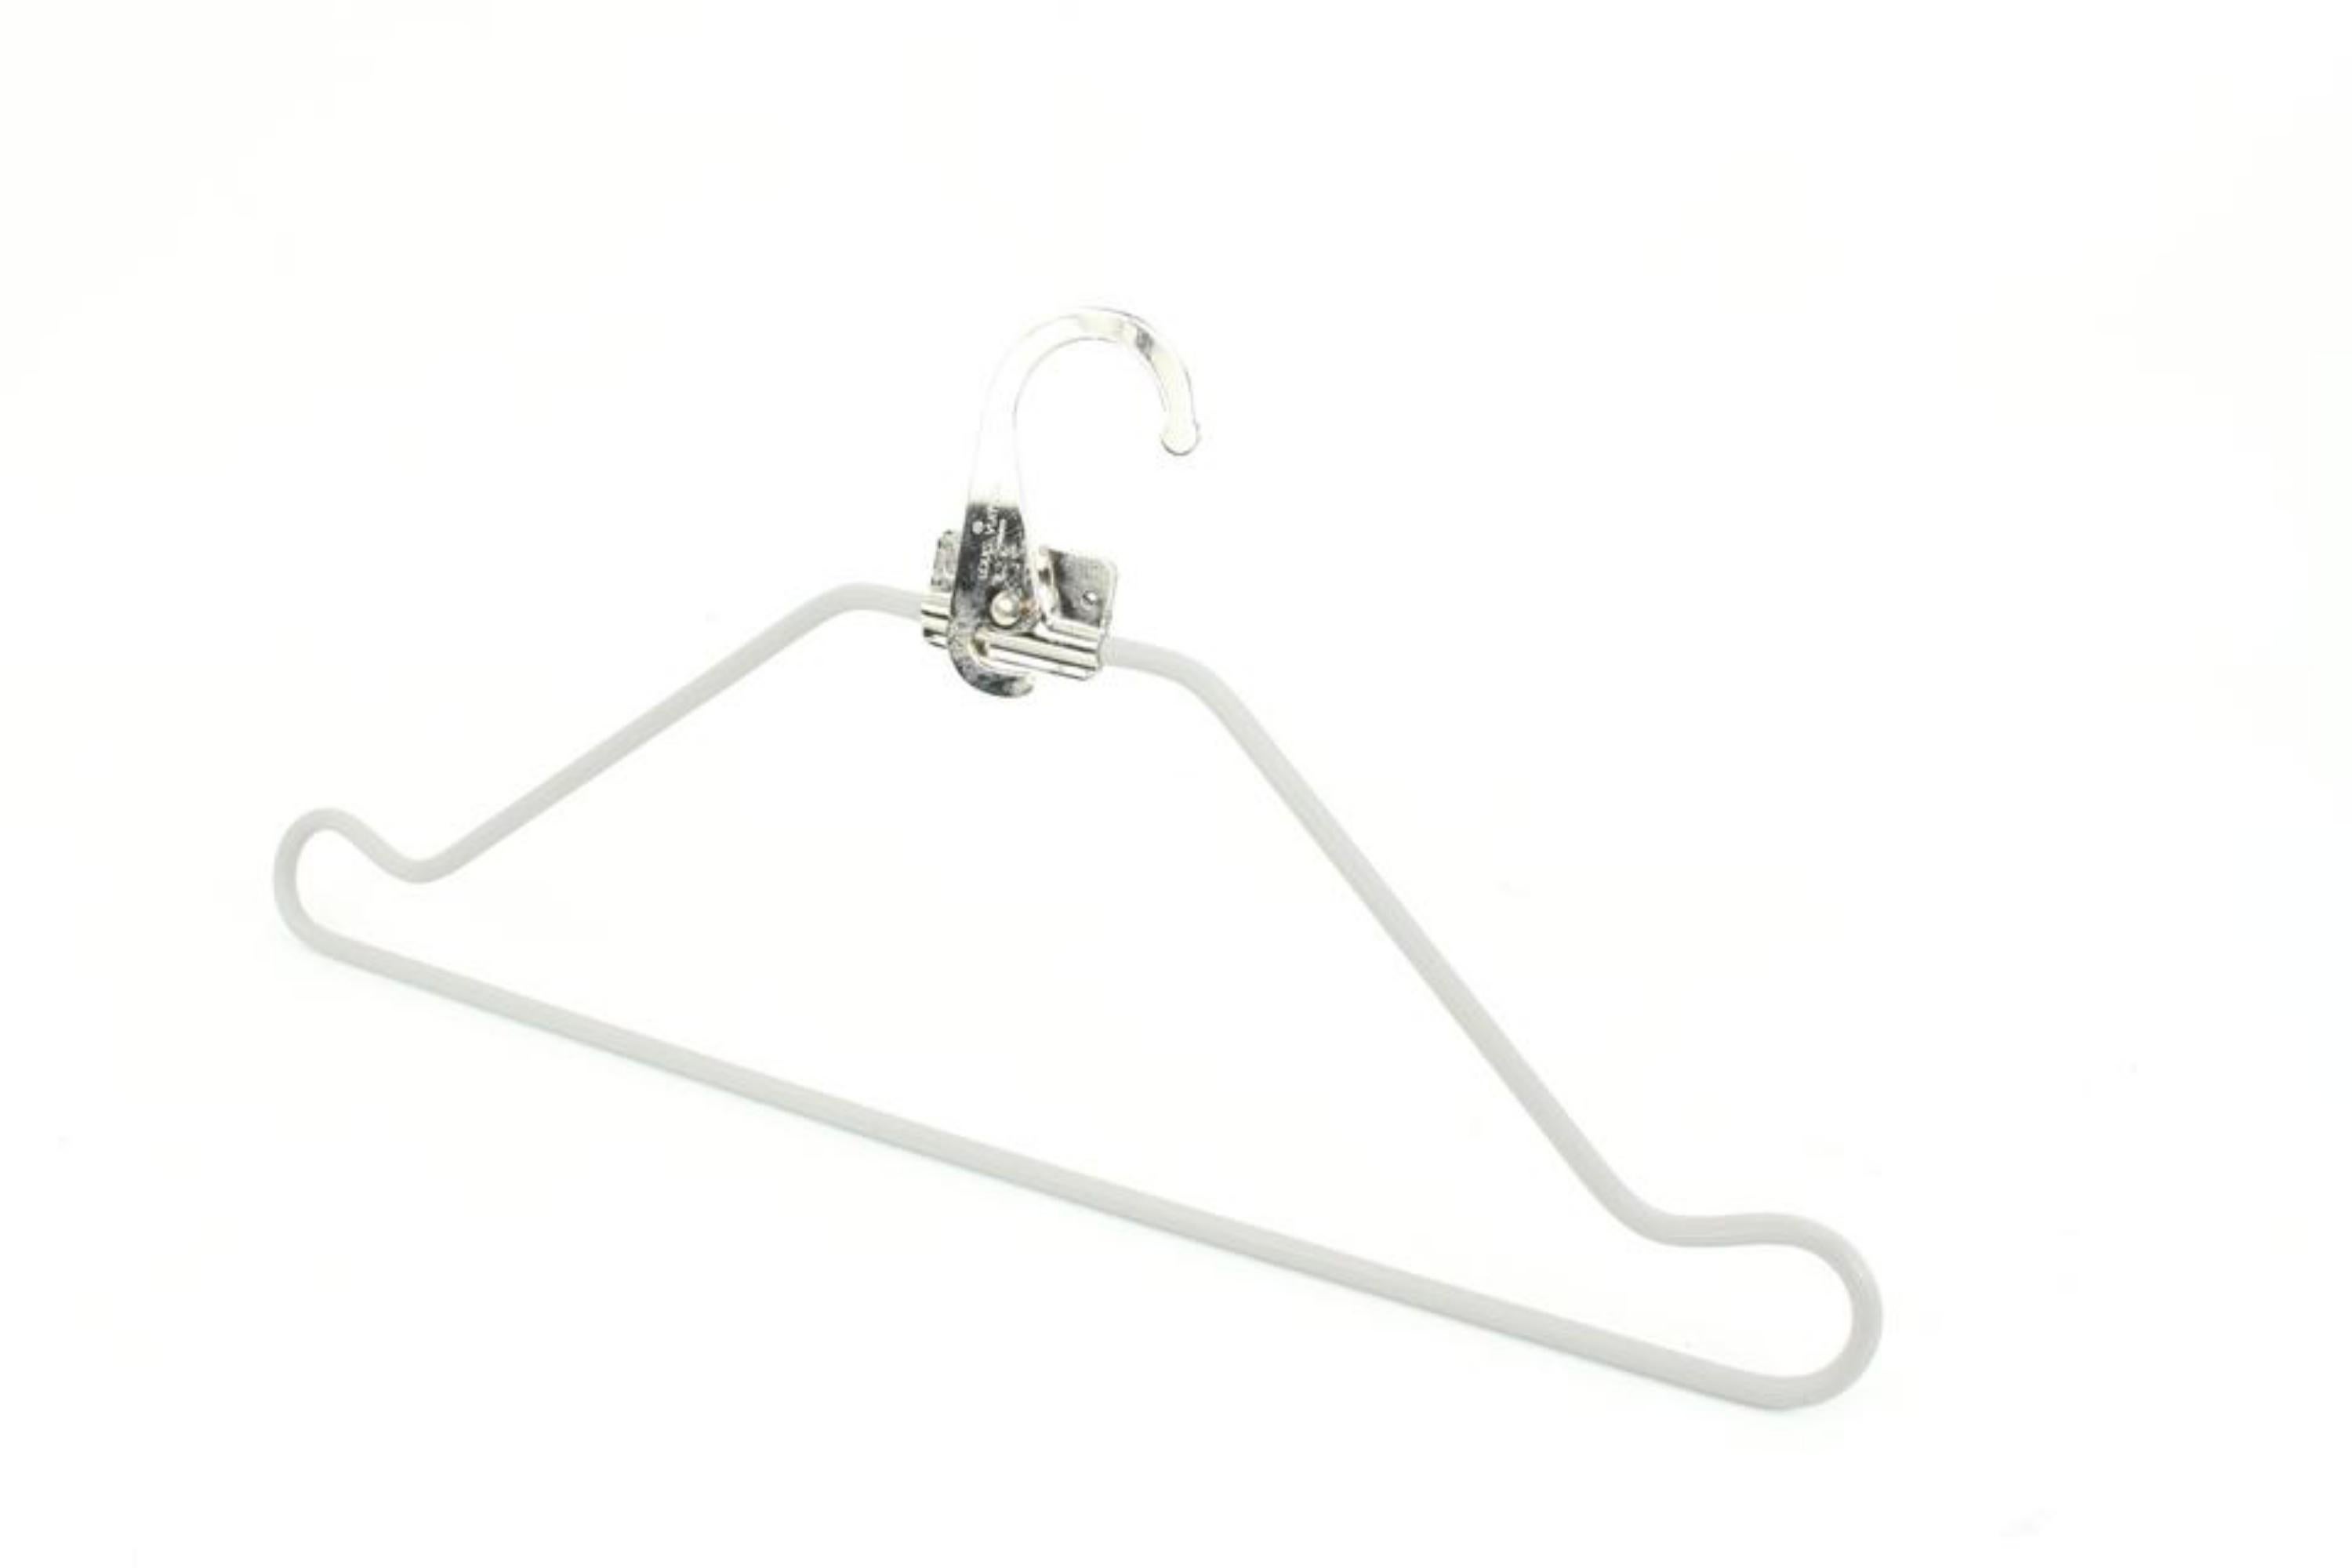 Louis Vuitton Grey x Silver Retractable Hanger 48lv51 In Good Condition For Sale In Dix hills, NY